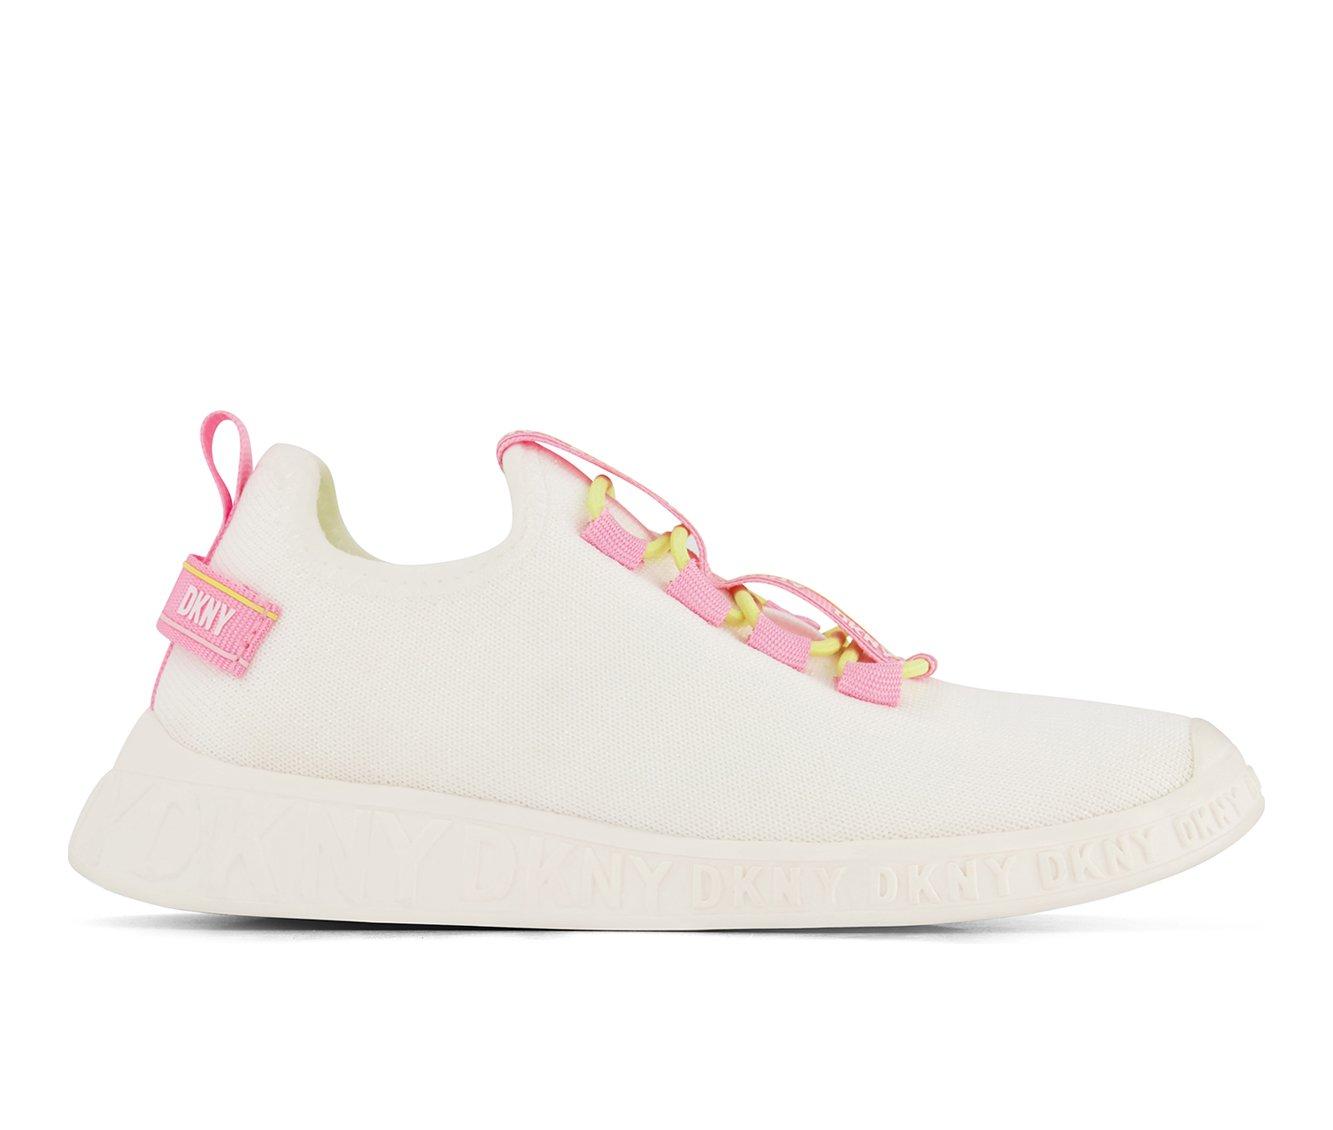 Girls' DKNY Little Kid & Big Kid Allie Lace Up Fashion Sneakers